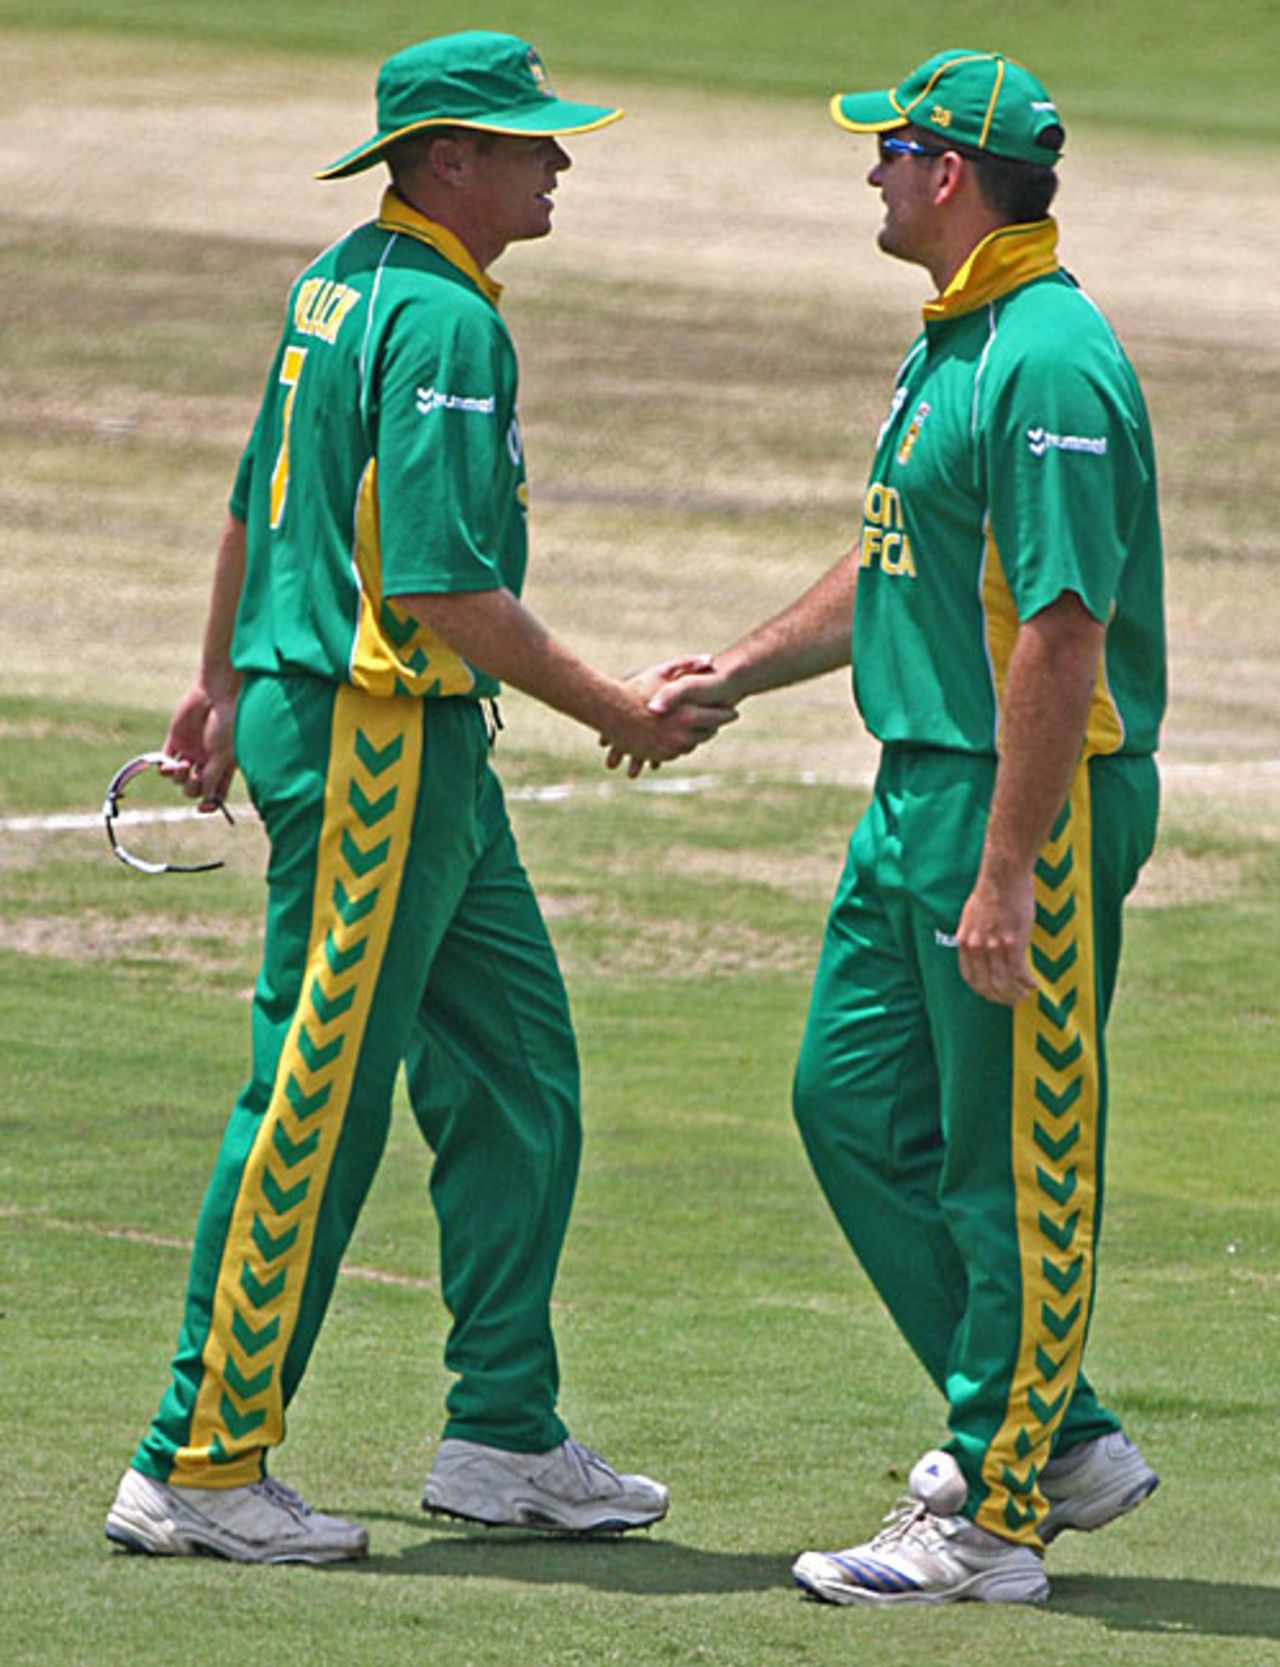 Graeme Smith shakes hands with Shaun Pollock after sending down his last ball in international cricket, South Africa v West Indies, 5th ODI, Johannesburg, February 3, 2008